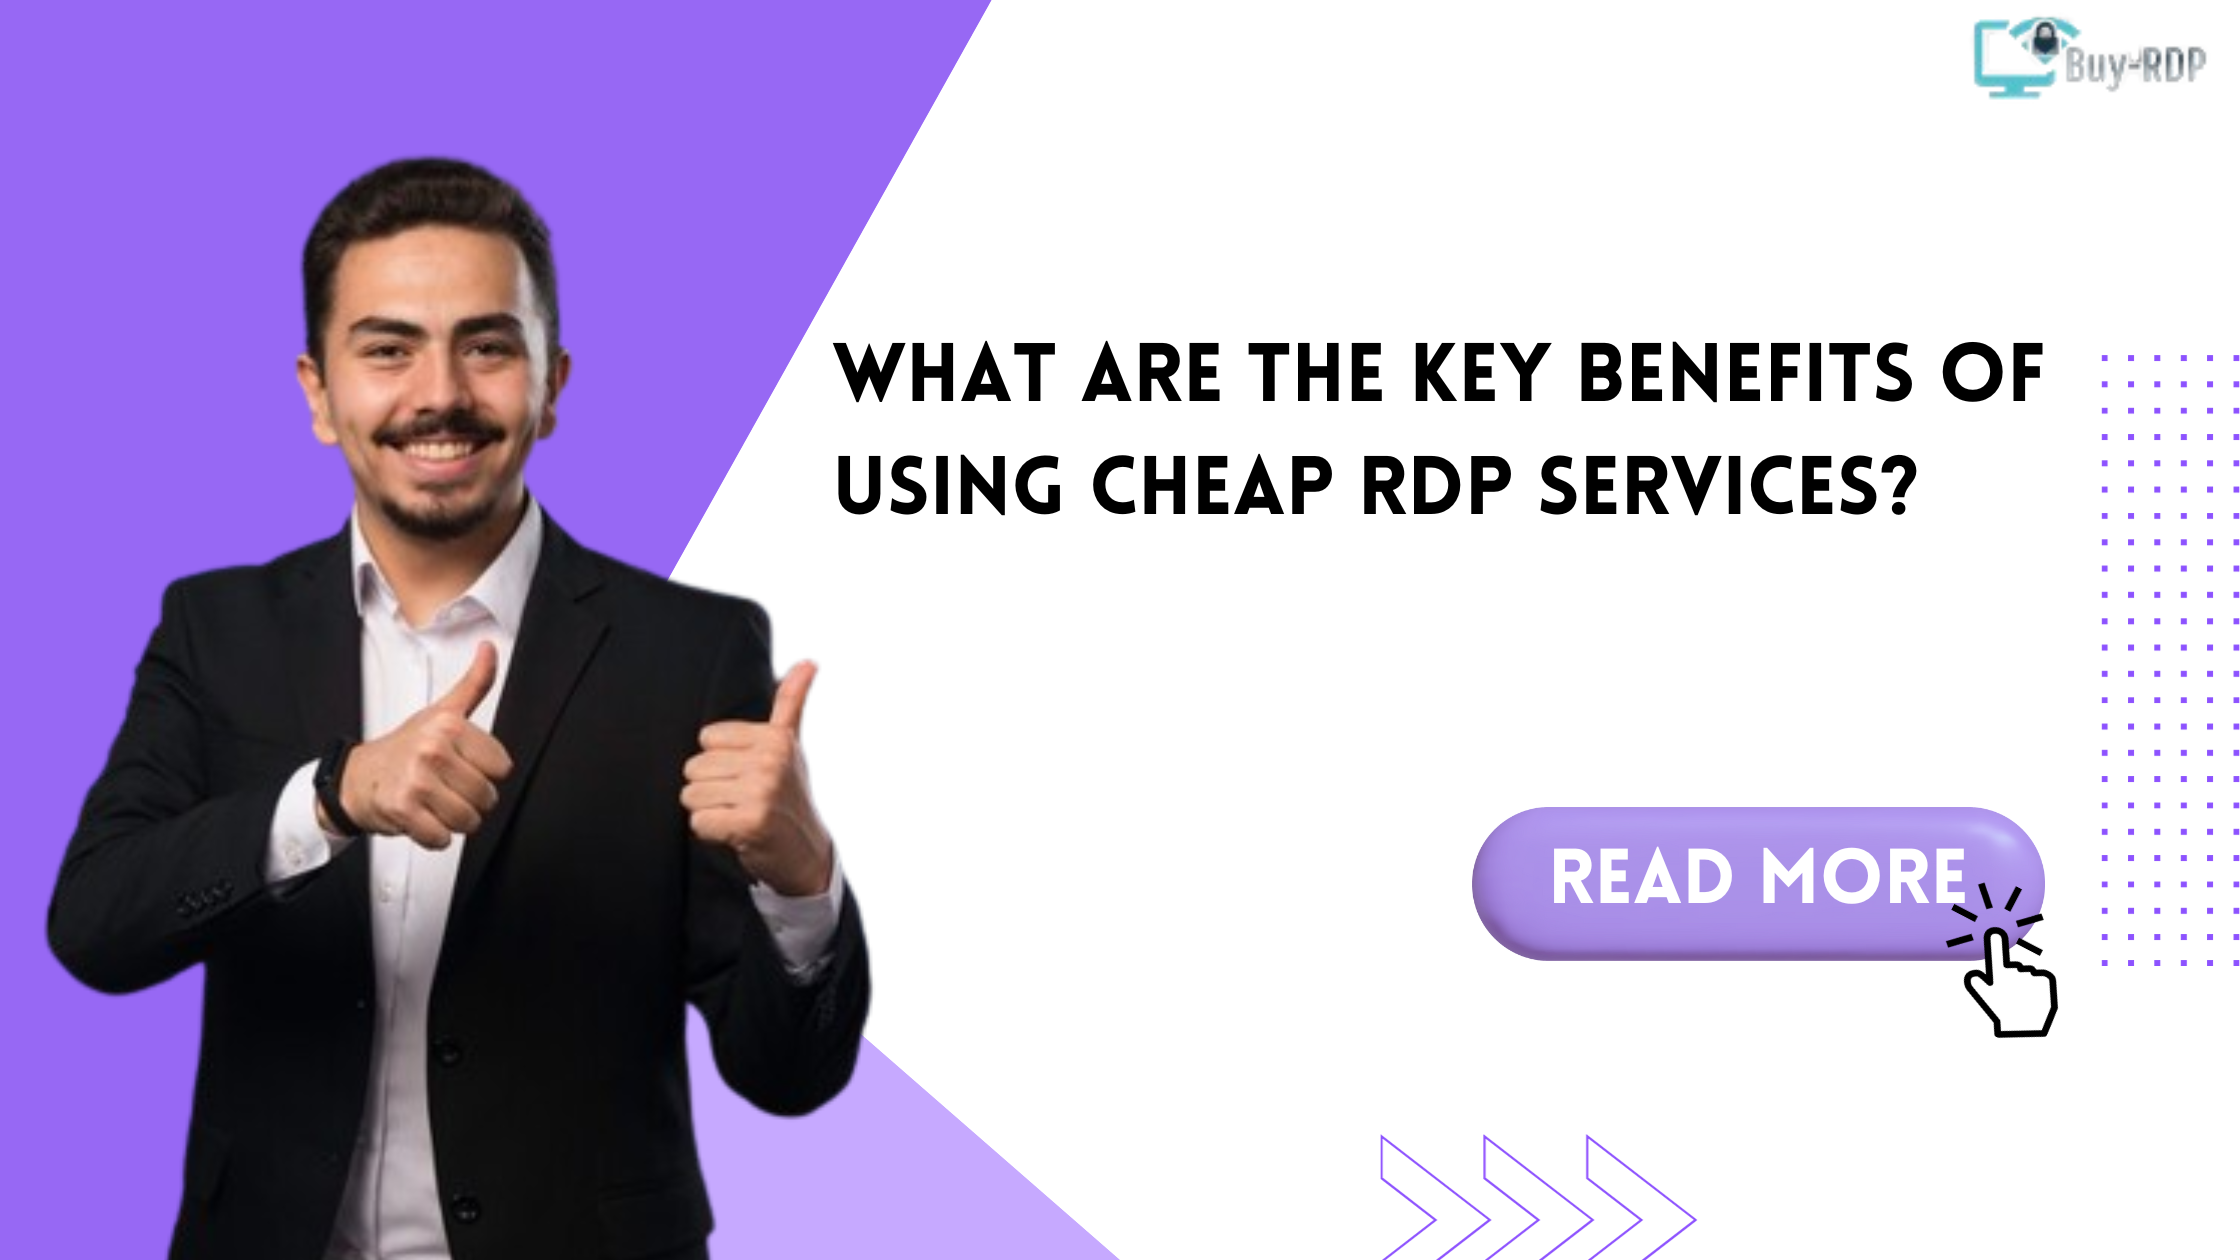 What Are the Key Benefits of Using Cheap RDP Services